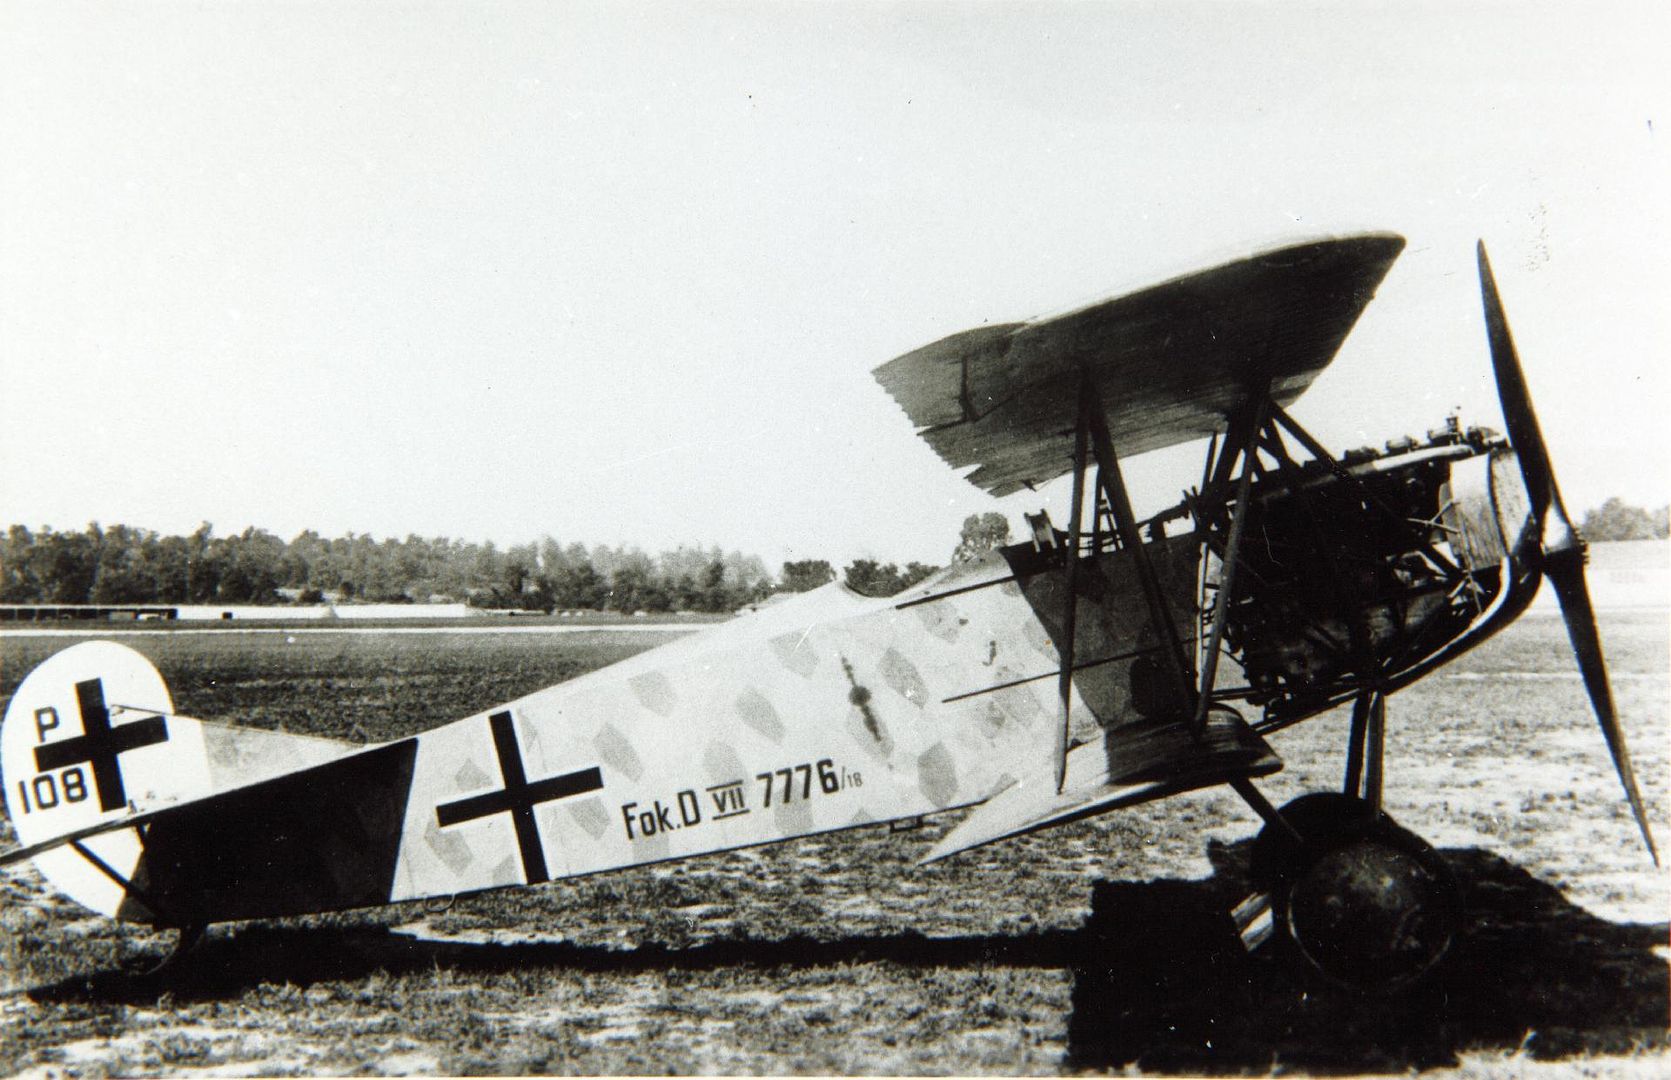  The Telltale P Number On The Rudder Shows That It Was Being Tested There At McCook Field